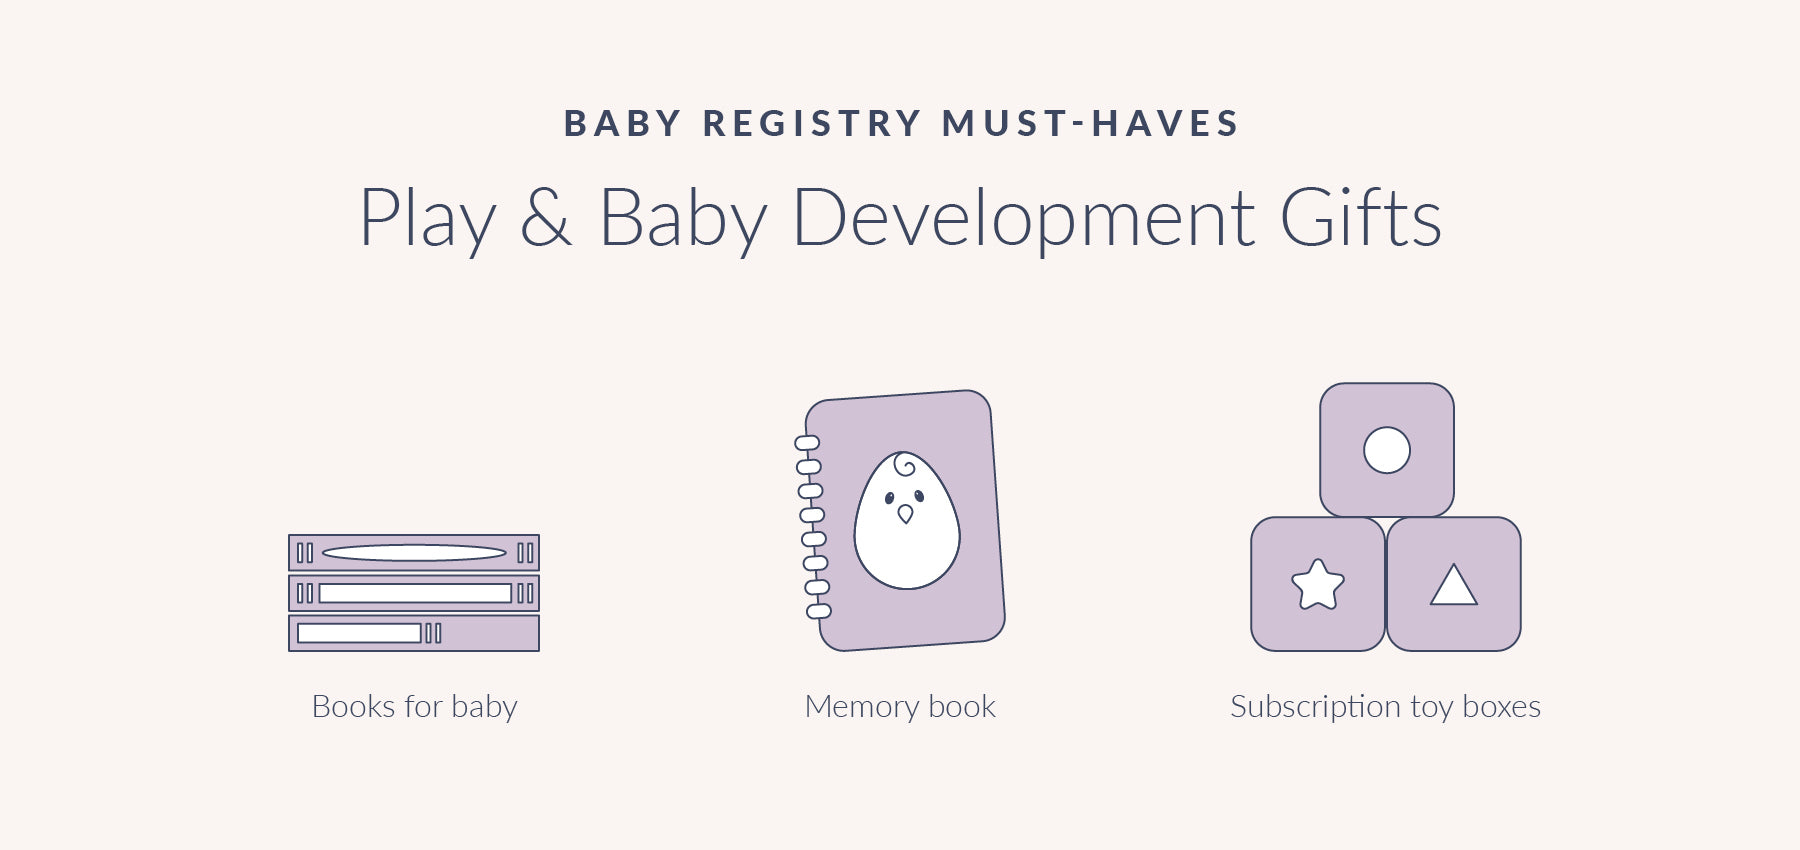 baby registry must haves: Play and Baby Development Gifts